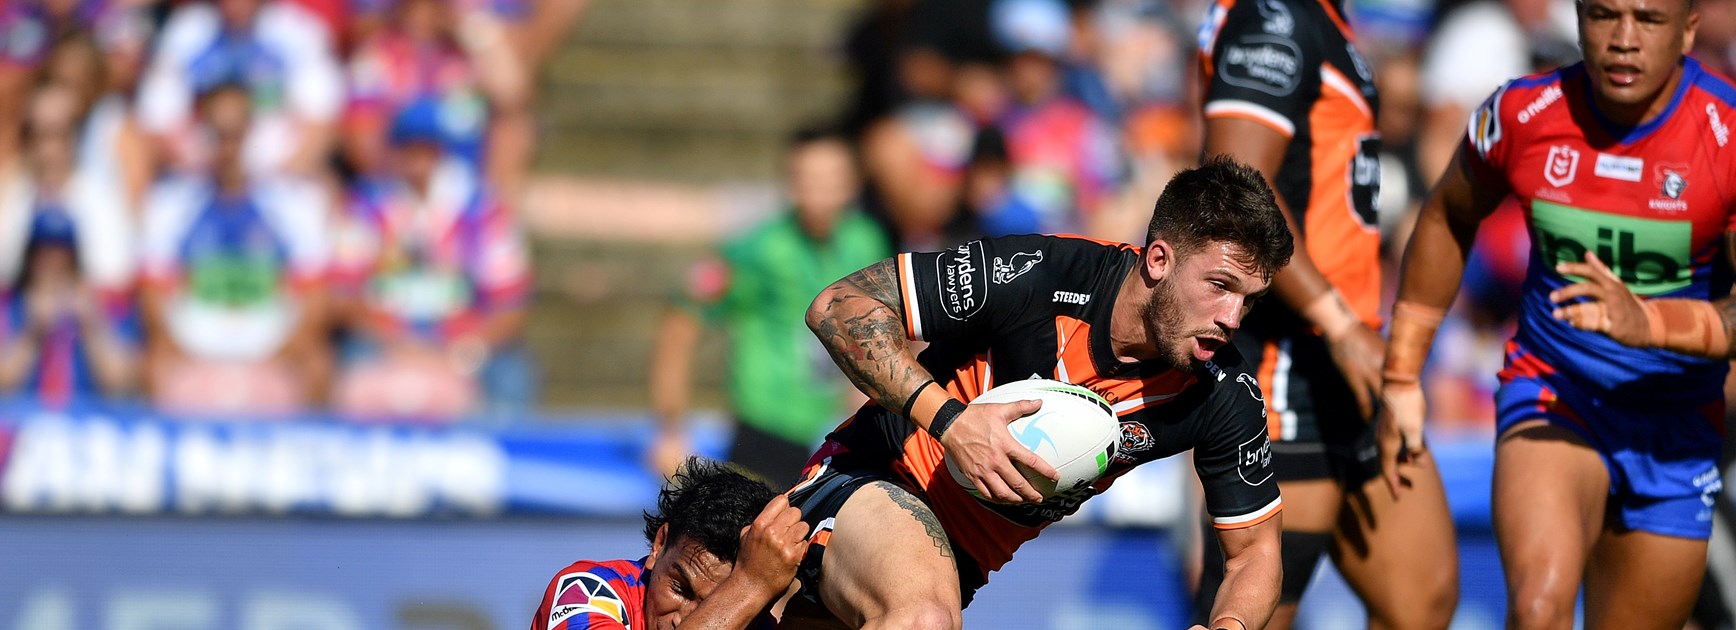 Knights go two straight with impressive home win over Wests Tigers